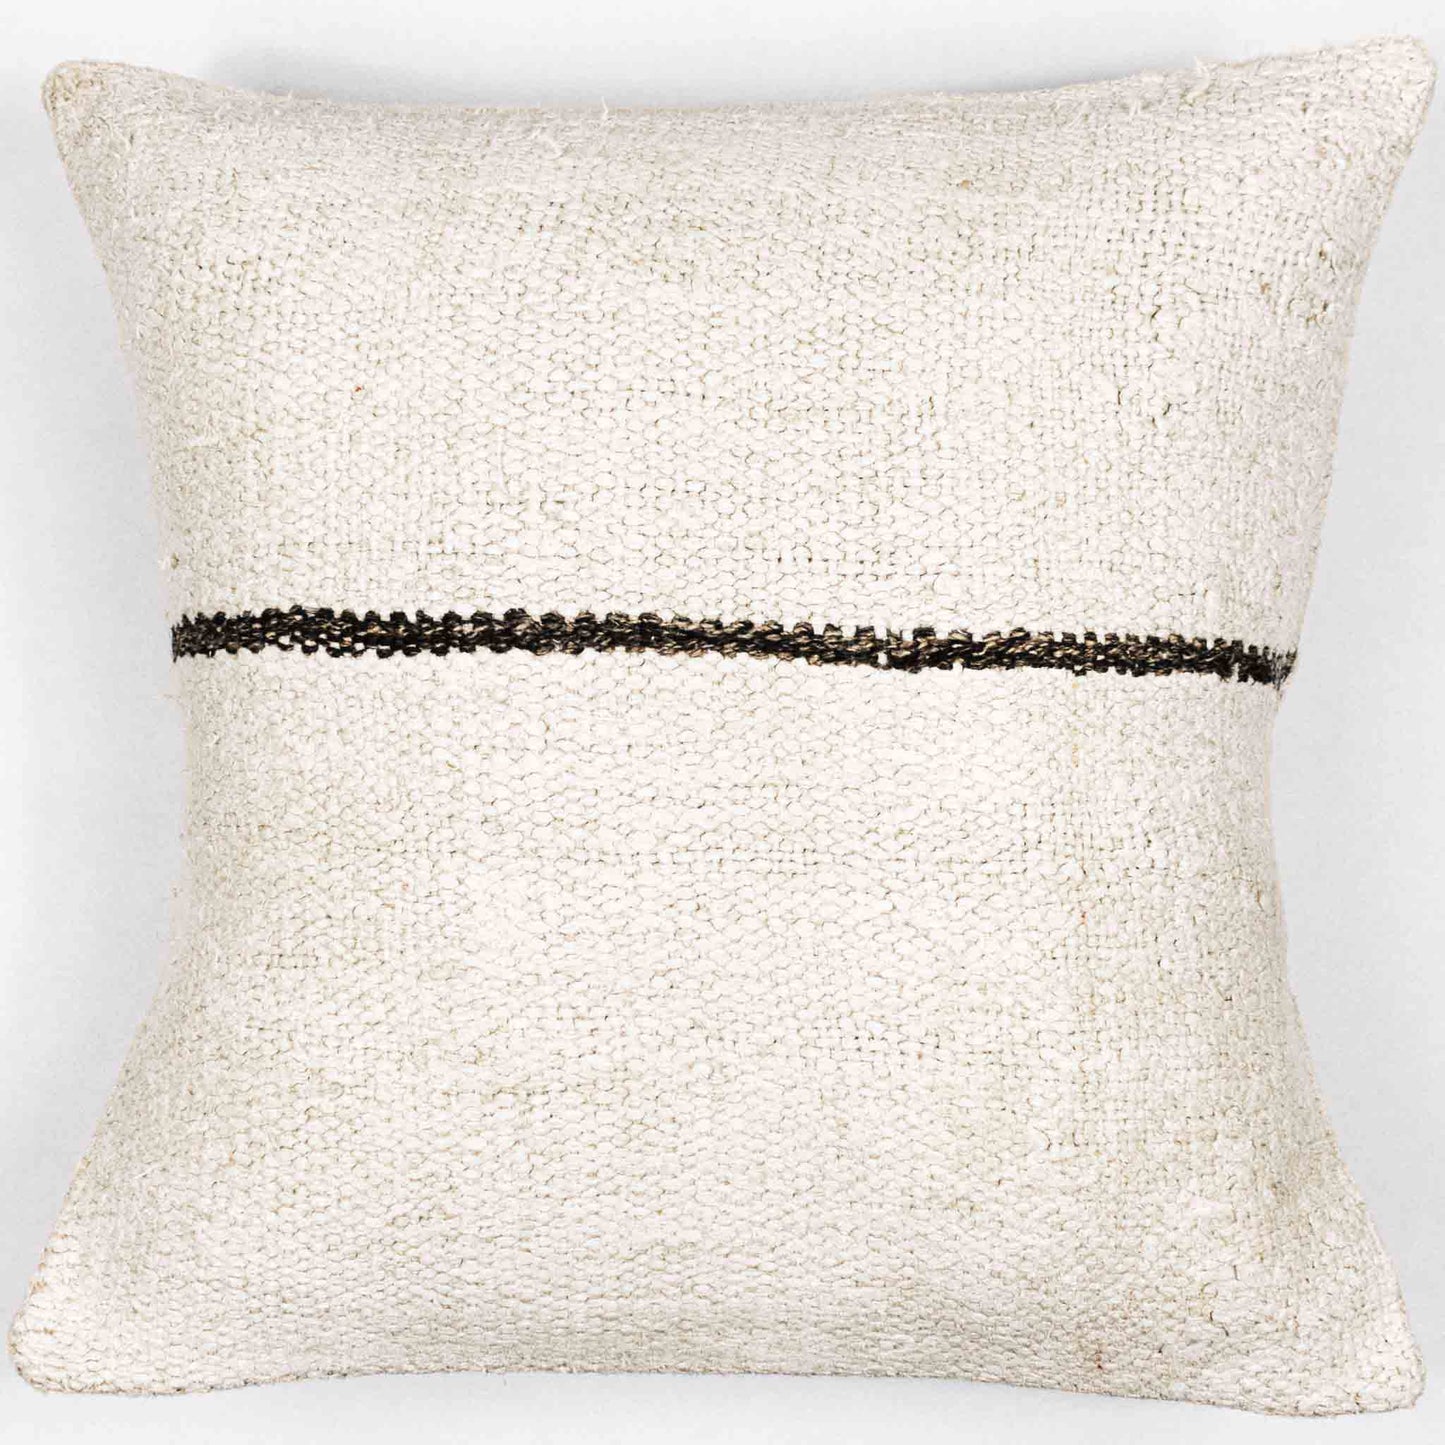 Handwoven Turkish kilim sisal pillow cover in cream with brown stripe.